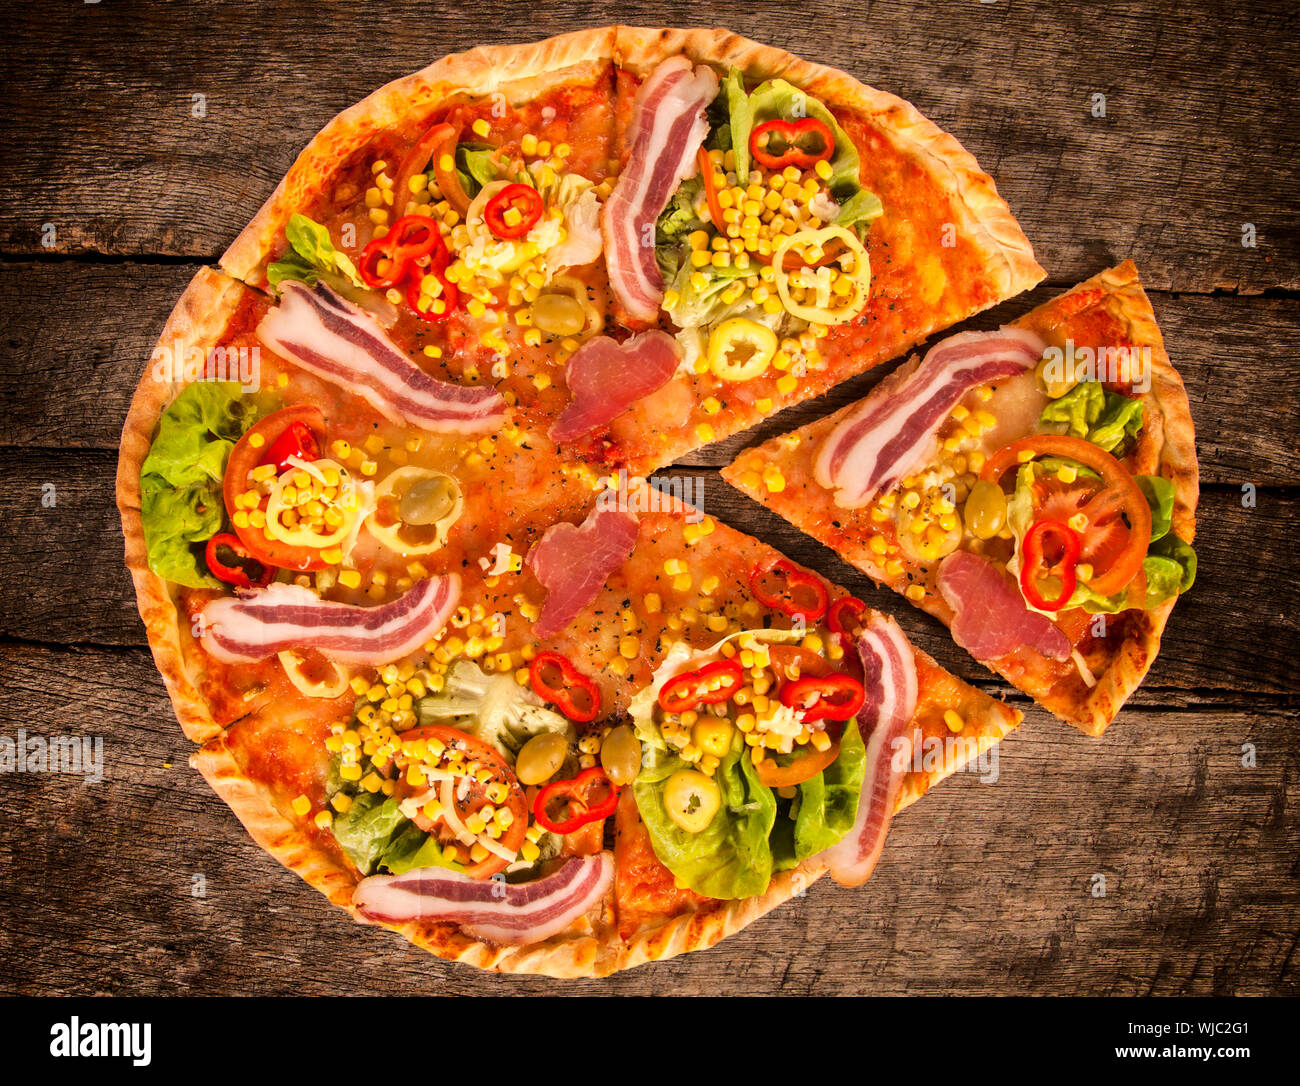 Whole gourment pizza on the wooden table, from above Stock Photo